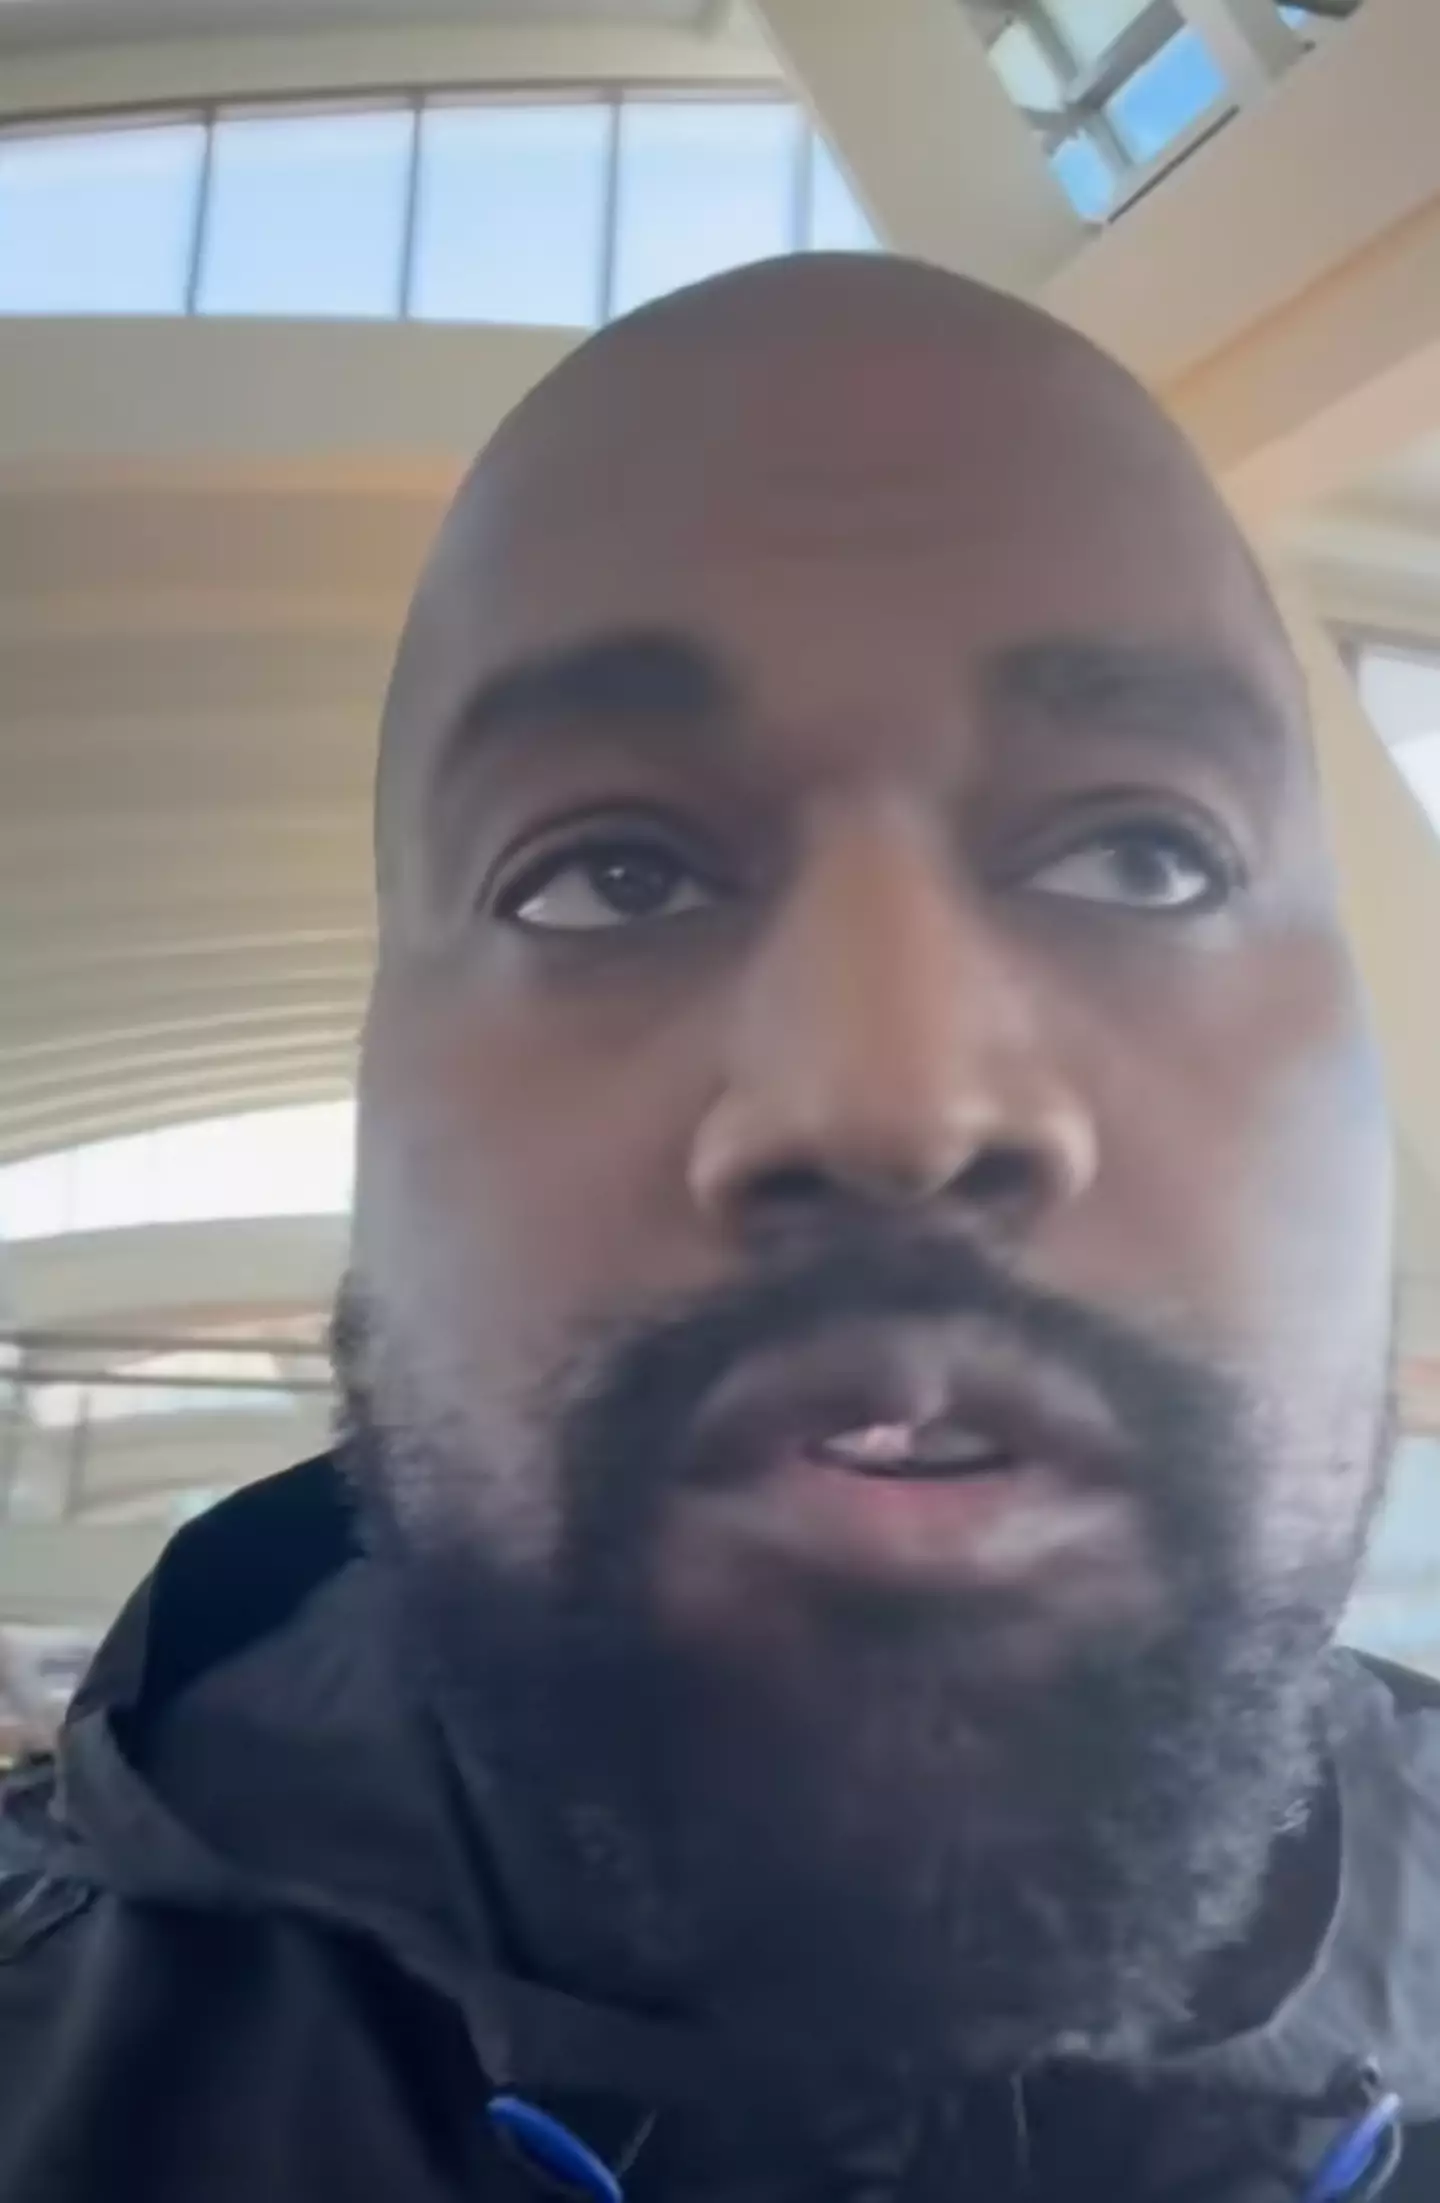 Kanye responded in a video.